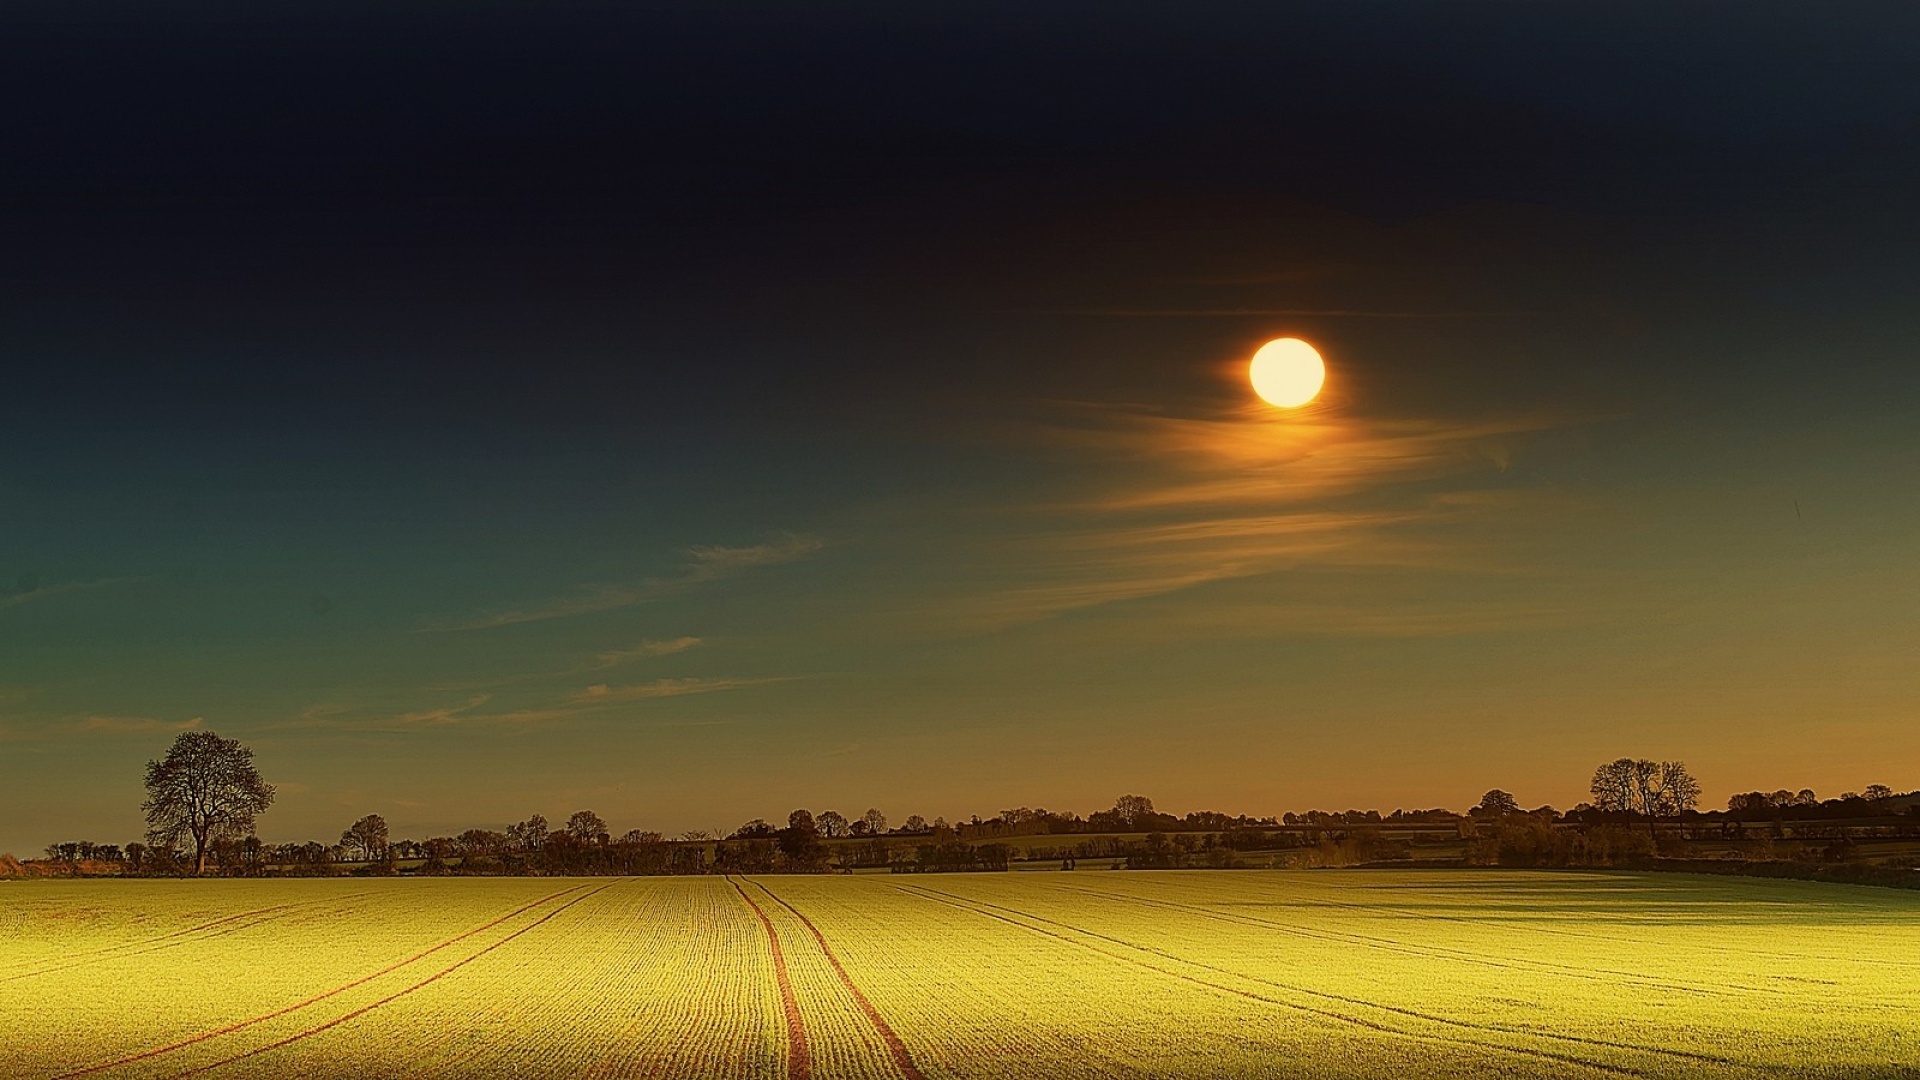 Wallpaper. Nature. photo. picture. yellow, moon, field, night